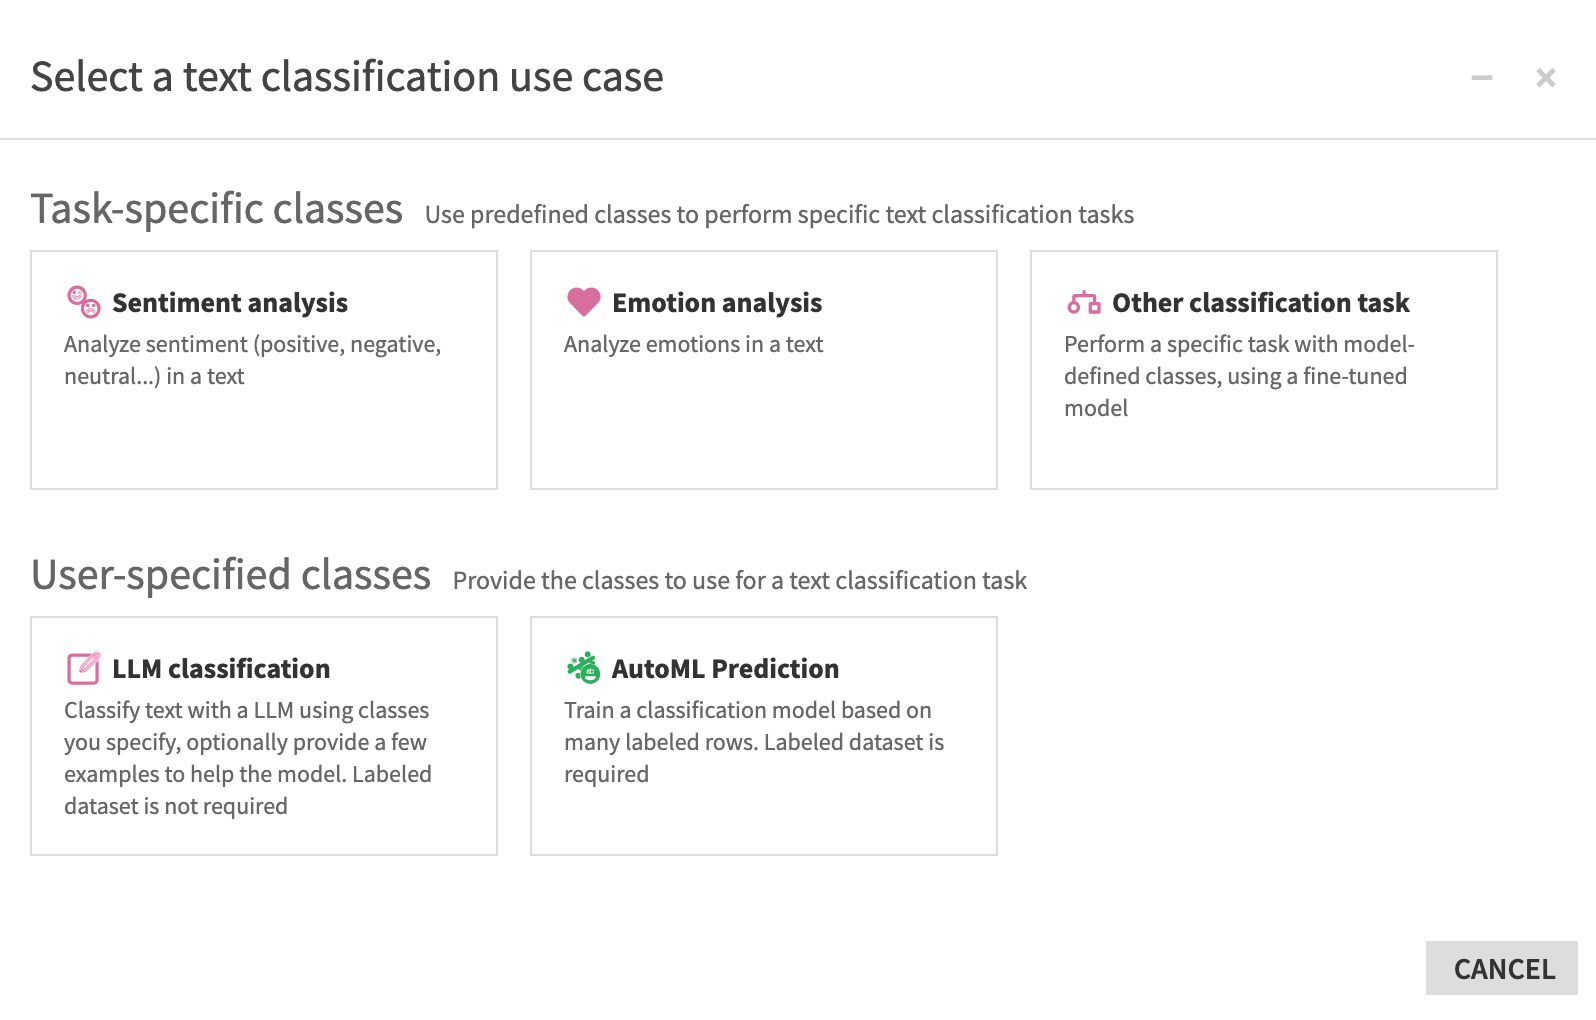 New classify text recipe window where you select the text classification use case.